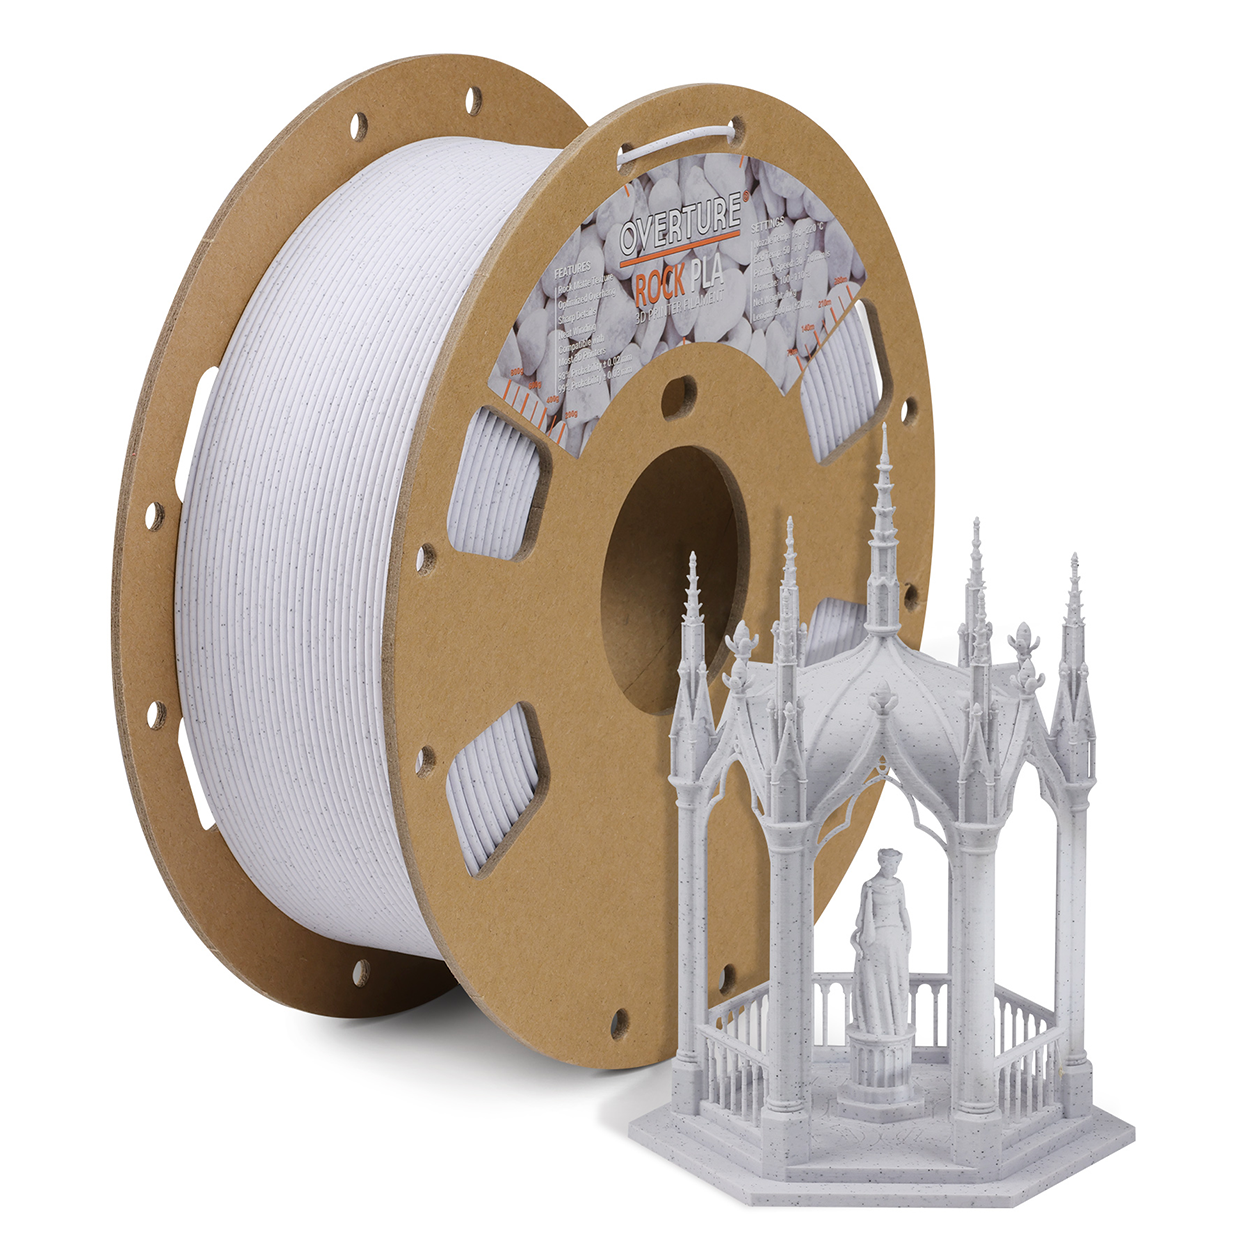 from $11.89 -> OVERTURE PLA - from $11.89 at .com